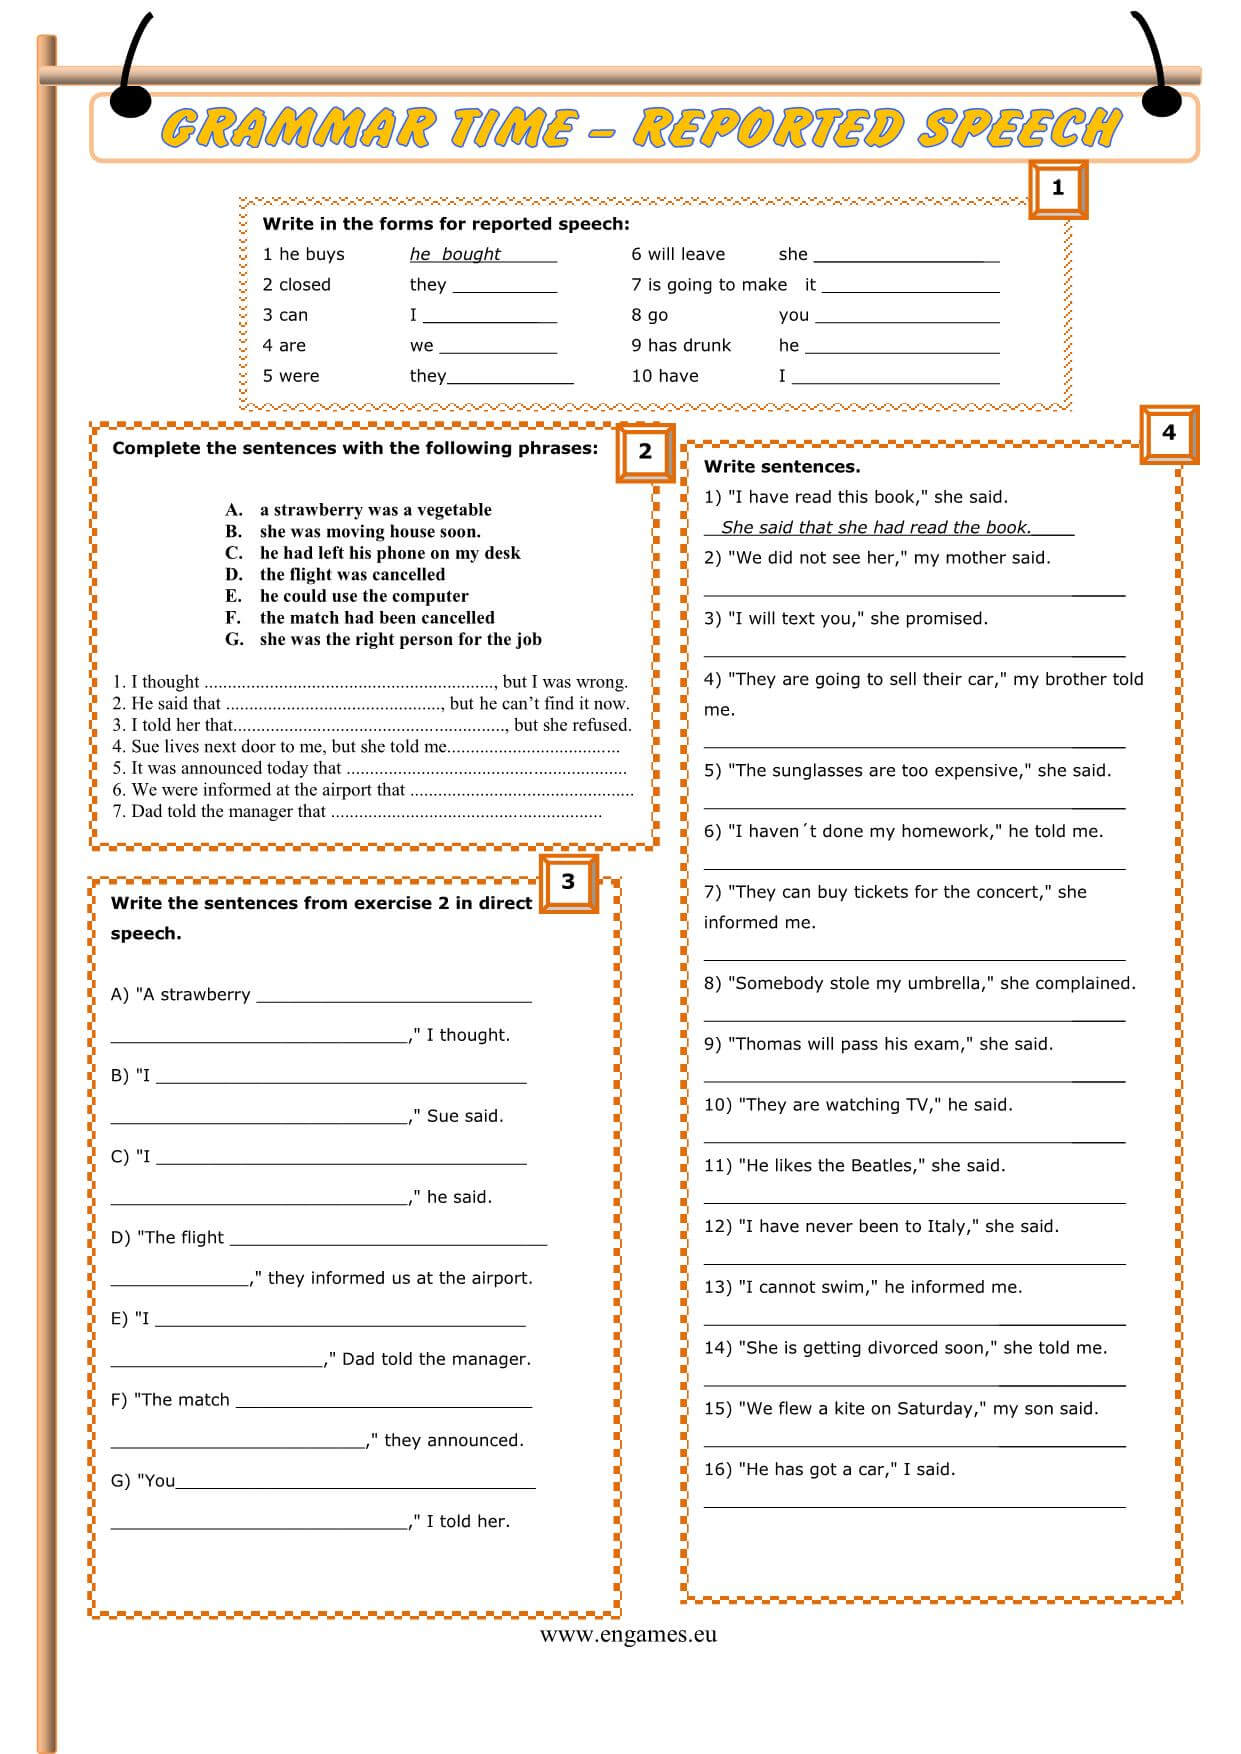 worksheet 26 subject reported speech answers